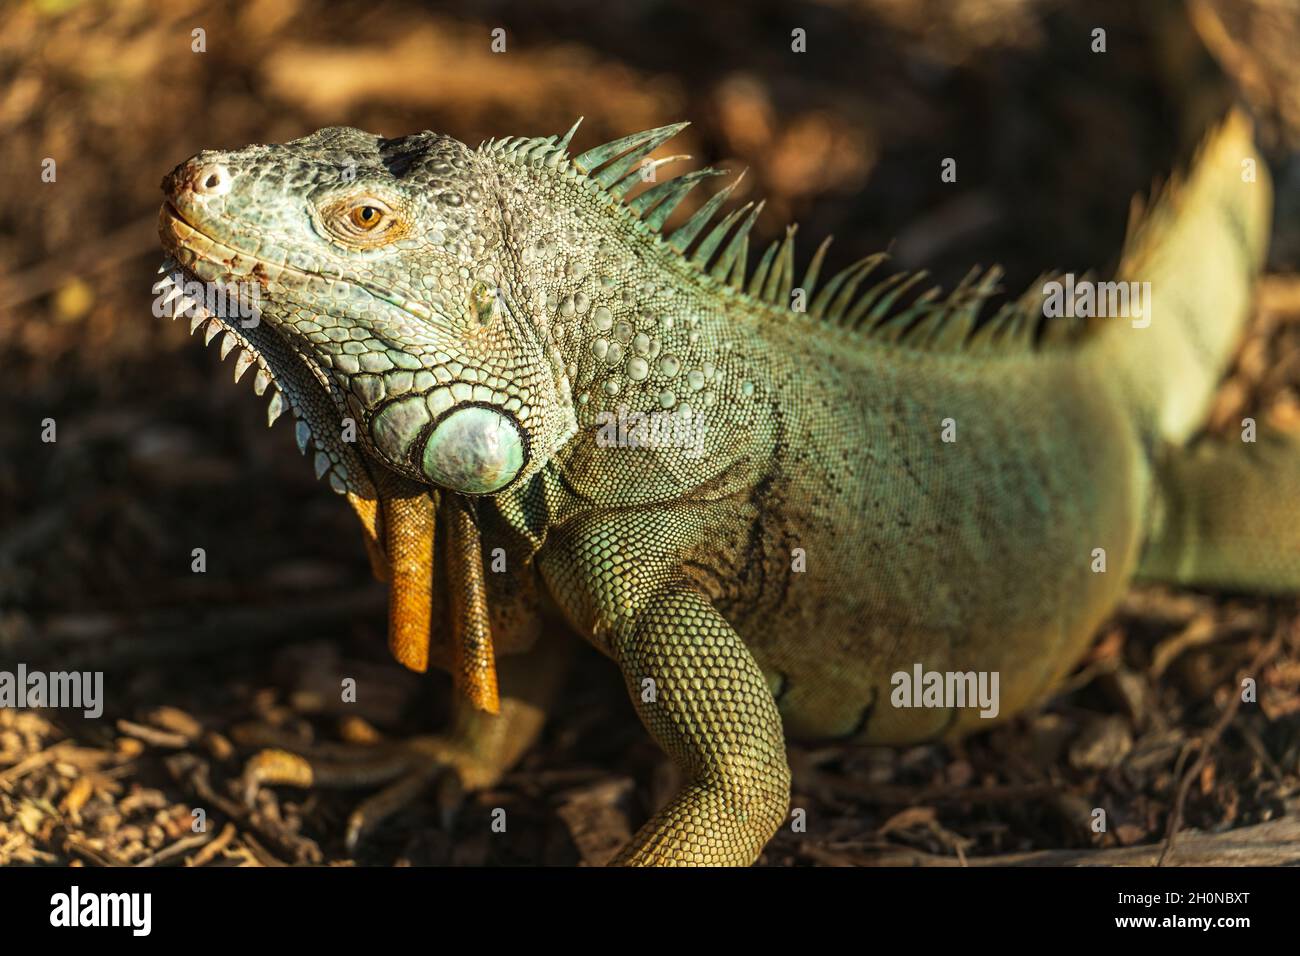 Green reptile iguana basking in sun on forest ground. Stock Photo